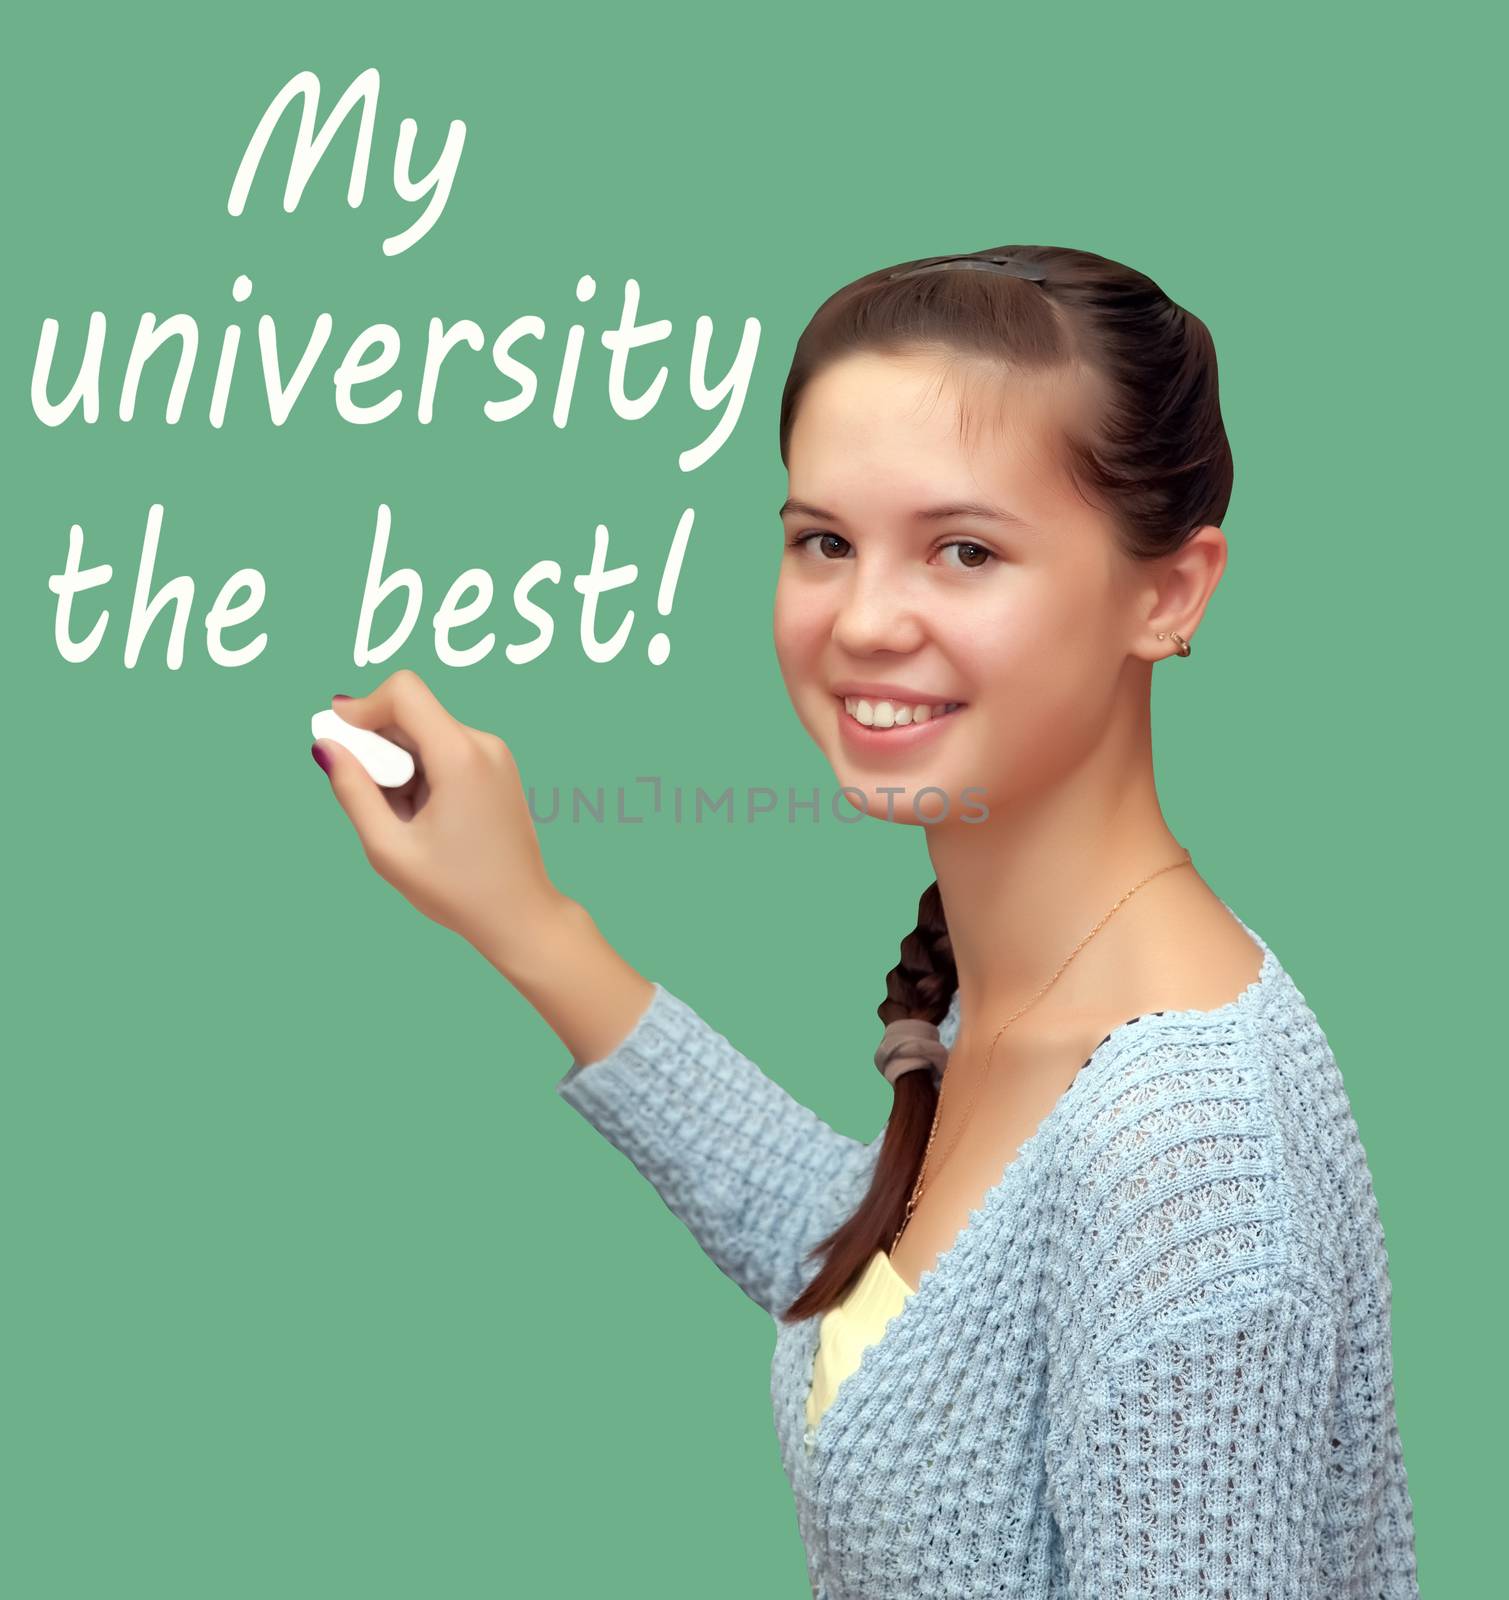 Girl student writes chalk "My university the best!". Isolated on a green background.